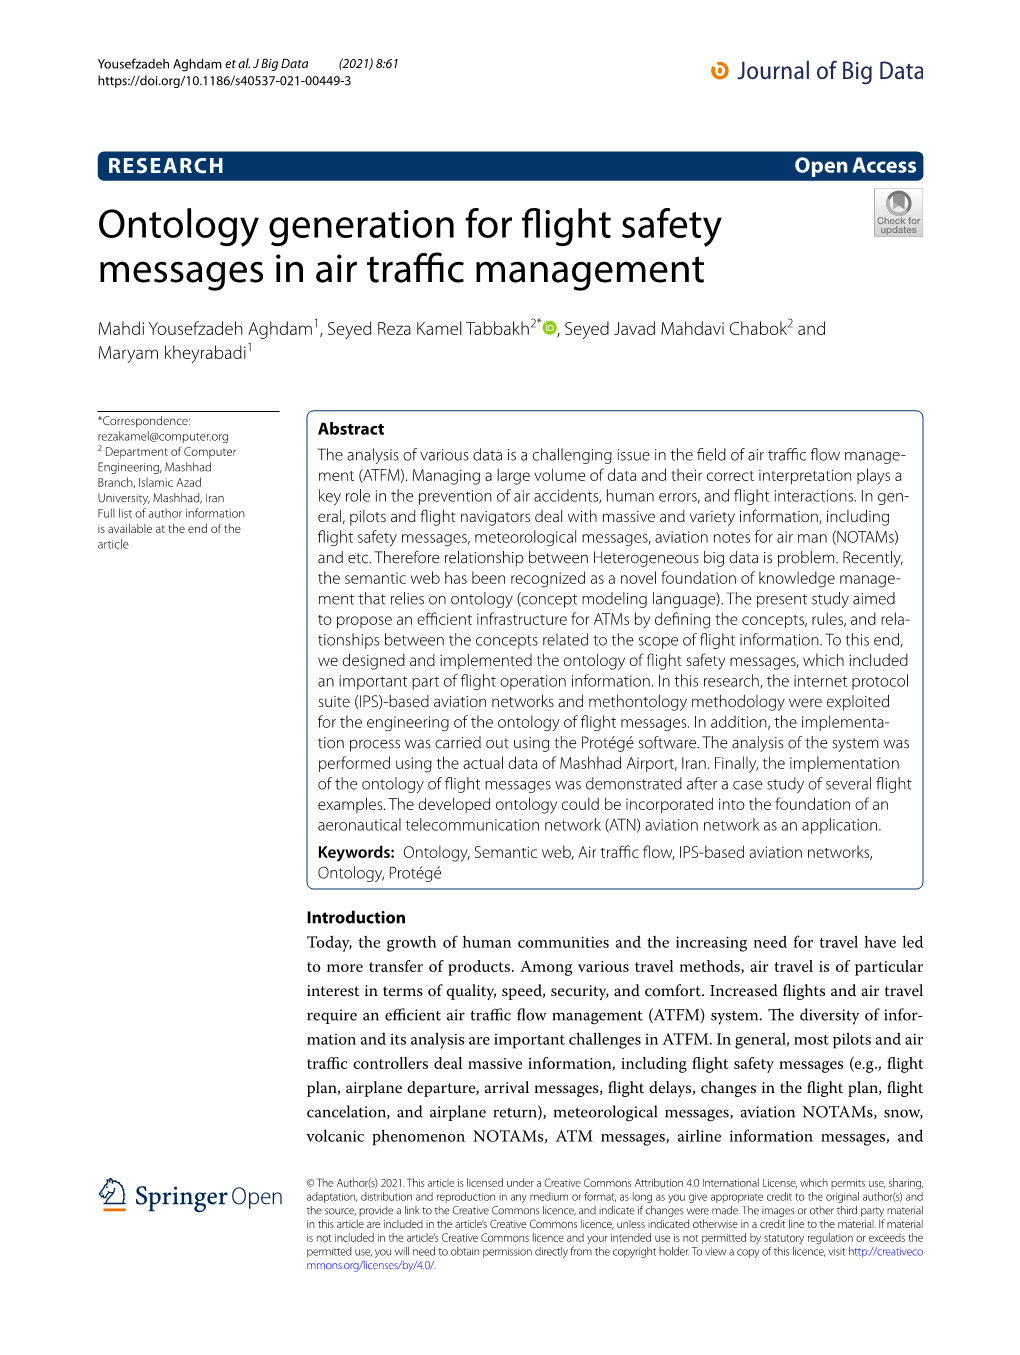 Ontology Generation for Flight Safety Messages in Air Traffic Management